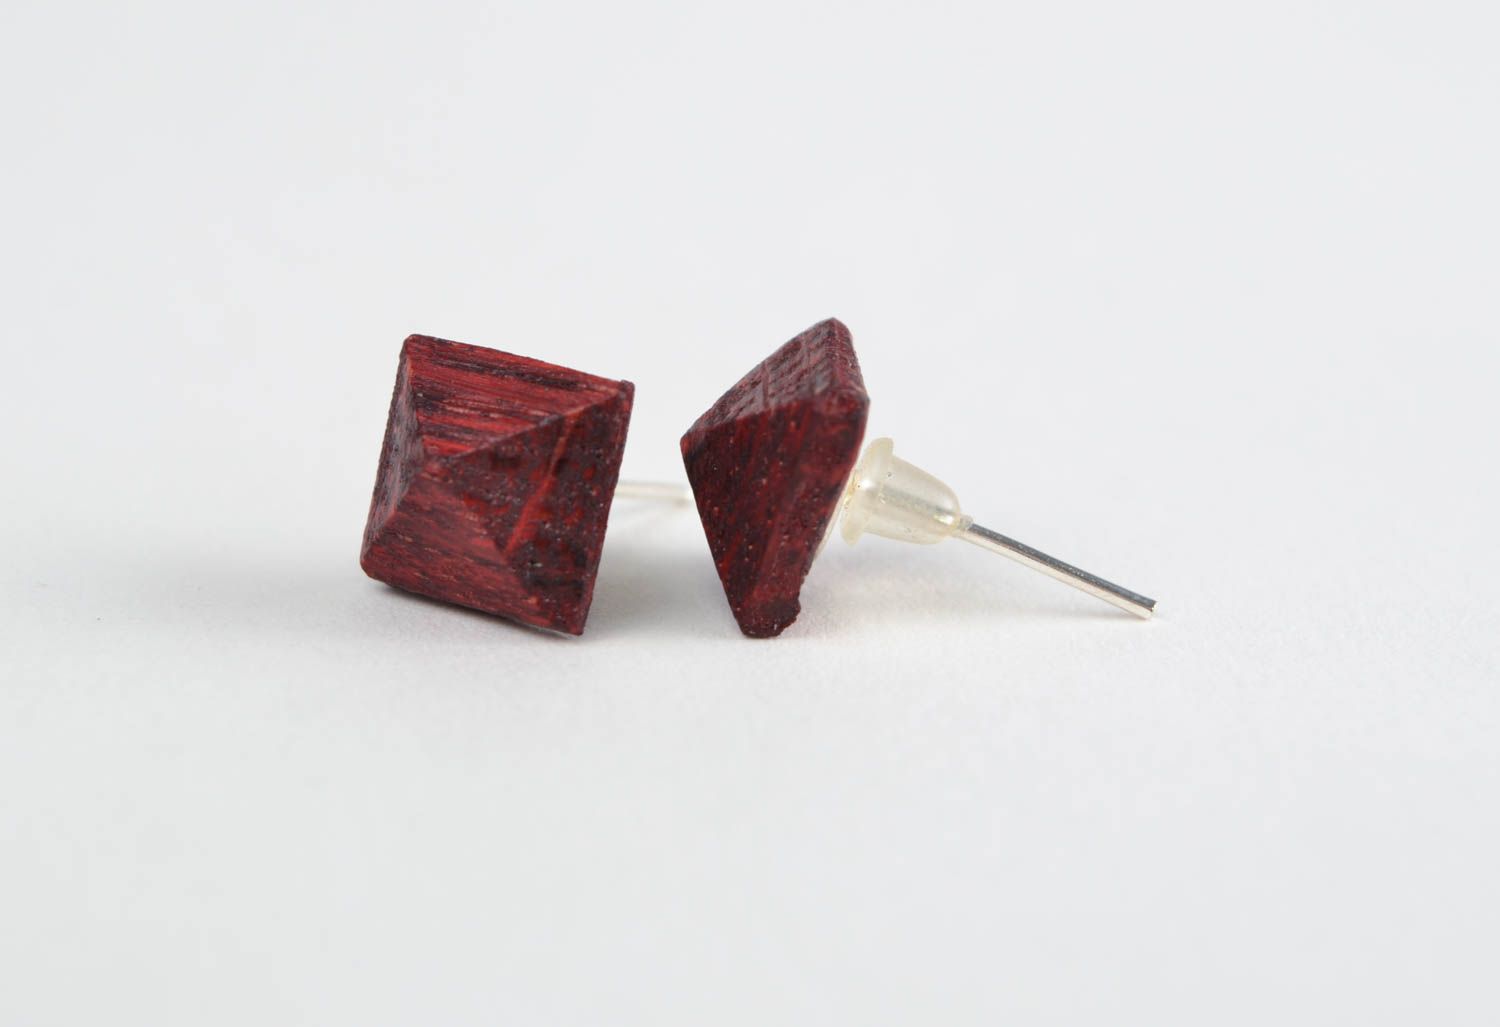 Handmade laconic small stylish painted wooden stud earrings for women photo 1